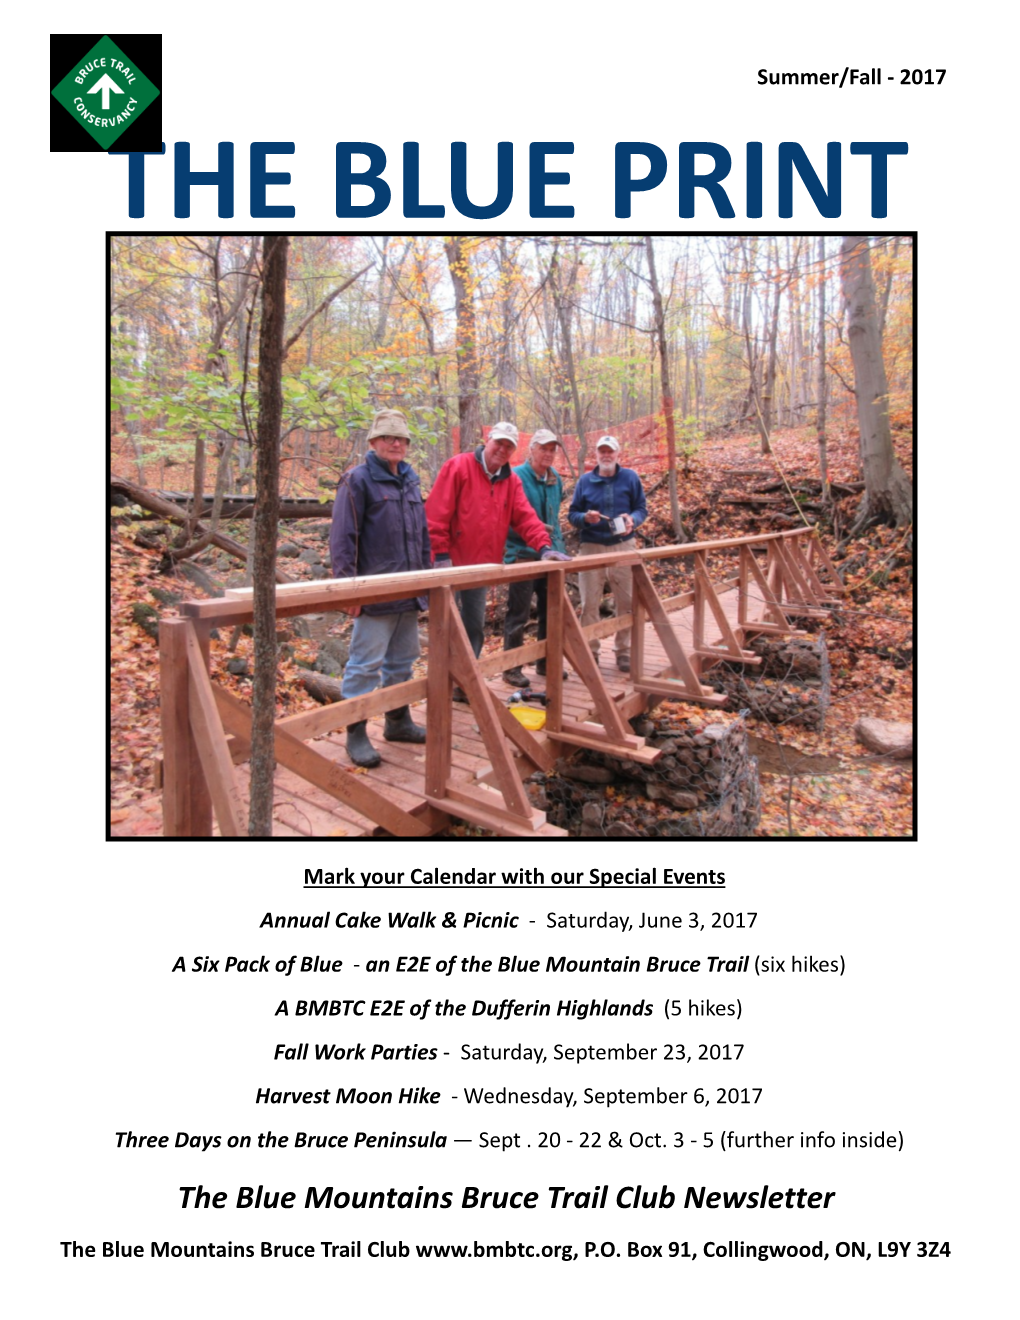 The Blue Mountains Bruce Trail Club Newsletter the Blue Mountains Bruce Trail Club P.O